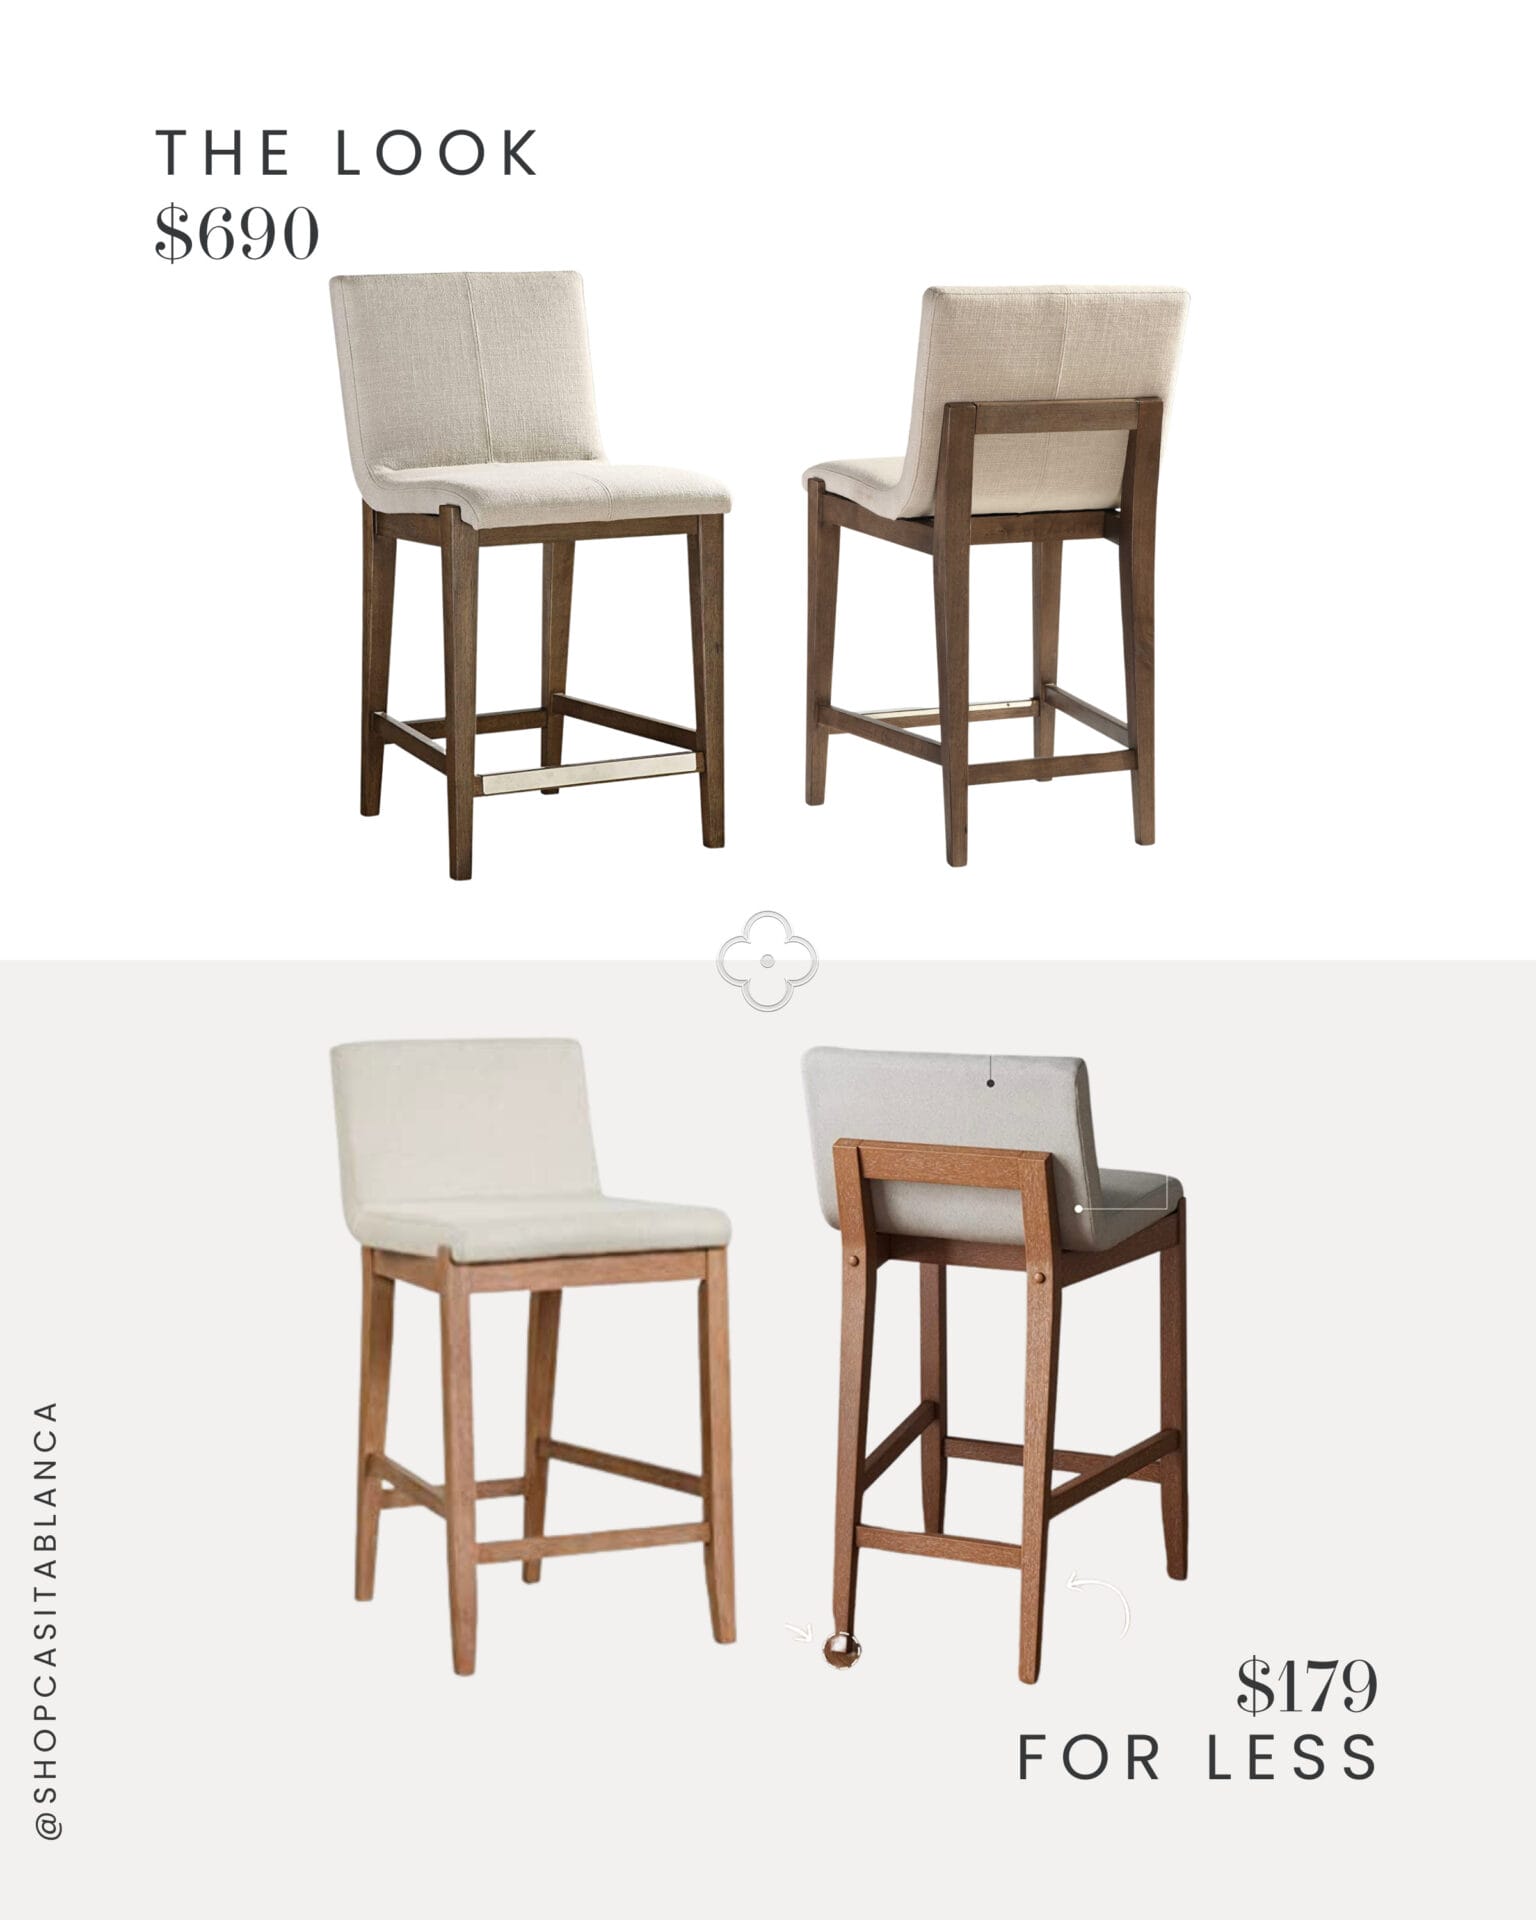 uttermost klemens counter stool dupe look for less designer lookalike